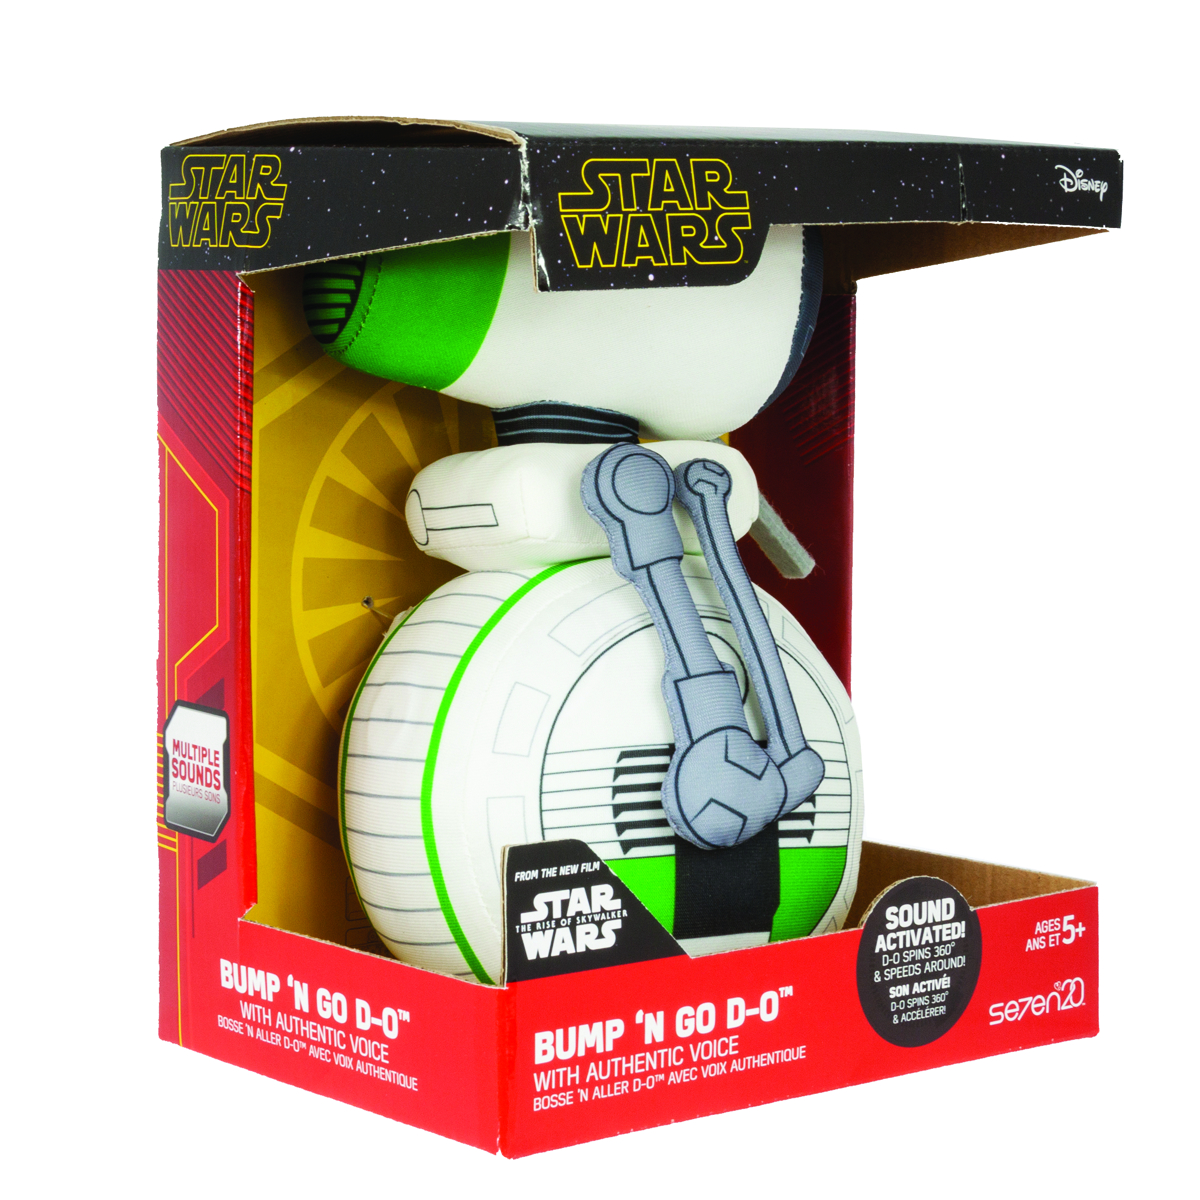 Details about   Star Wars Bump N' Go D-O Sound/Motion Activated 9 Inch Plush Authentic Voice New 